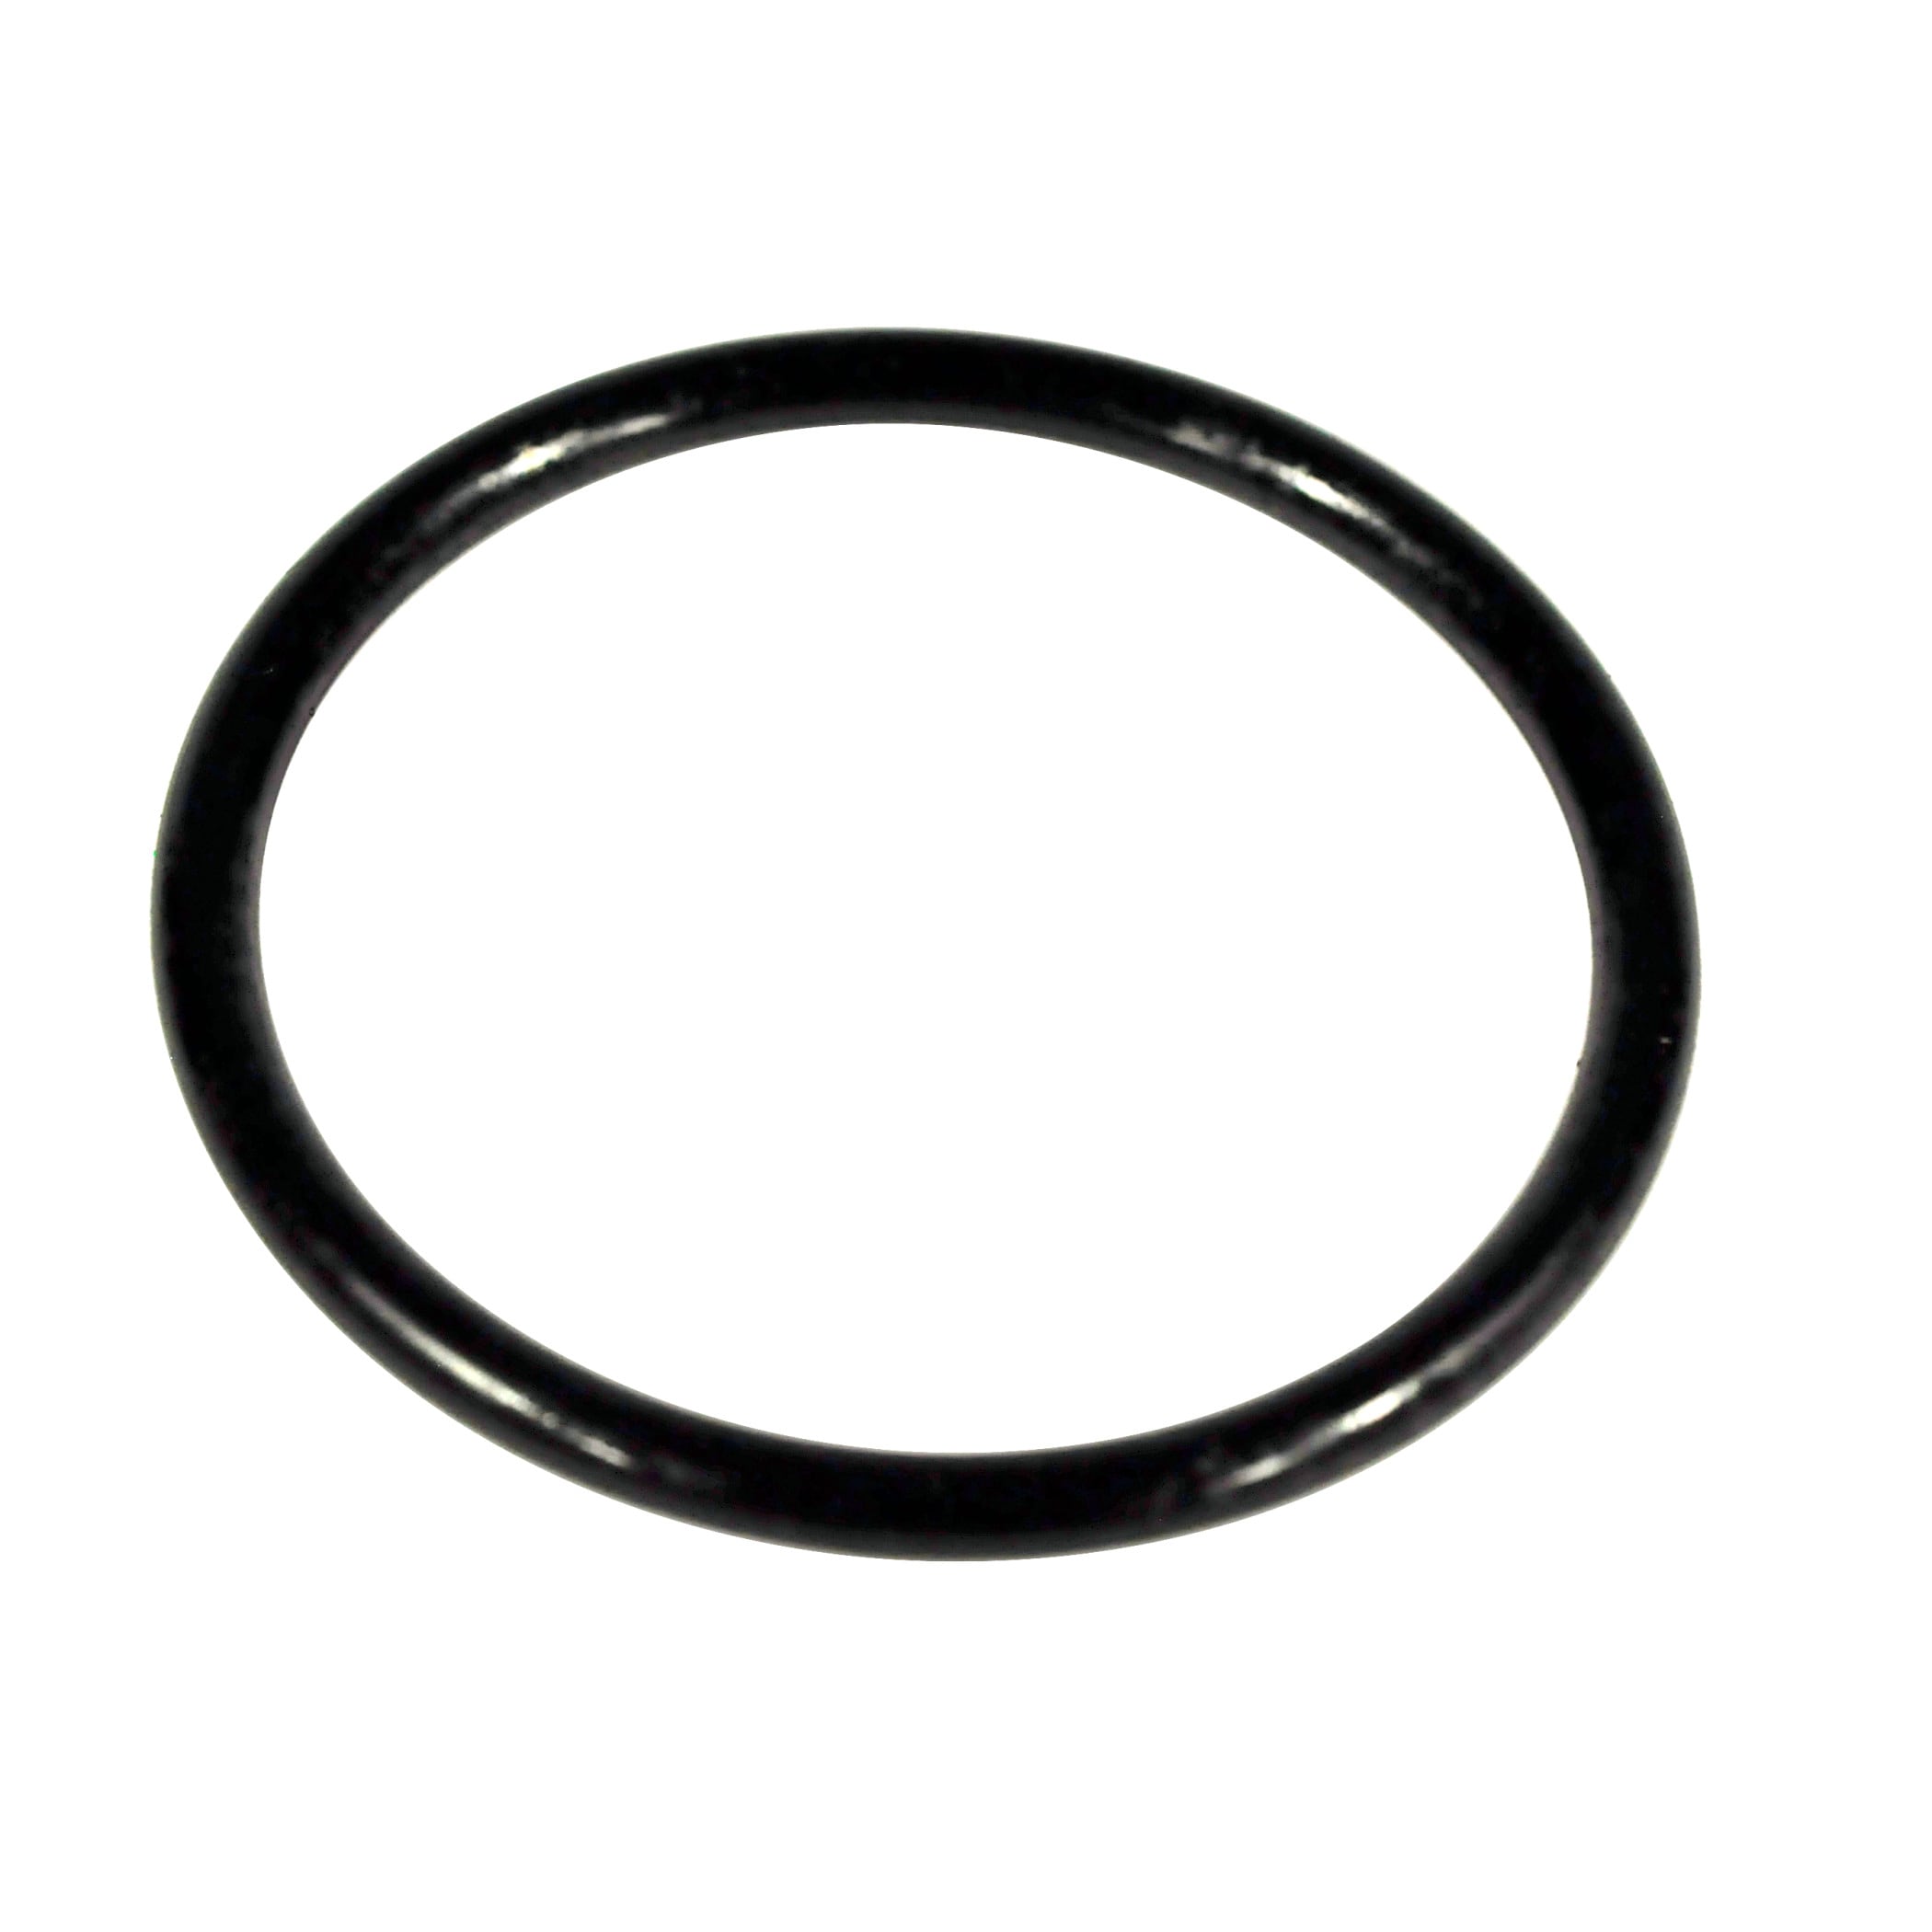 Hose Piston 1 2 2.5 3 4 5 6 Inch Fuel Injector High Pressure Rectangular  Flat Washer White Silicone Black Red Nitrile Rubber Sealing O Ring - China  Oring, X Ring | Made-in-China.com